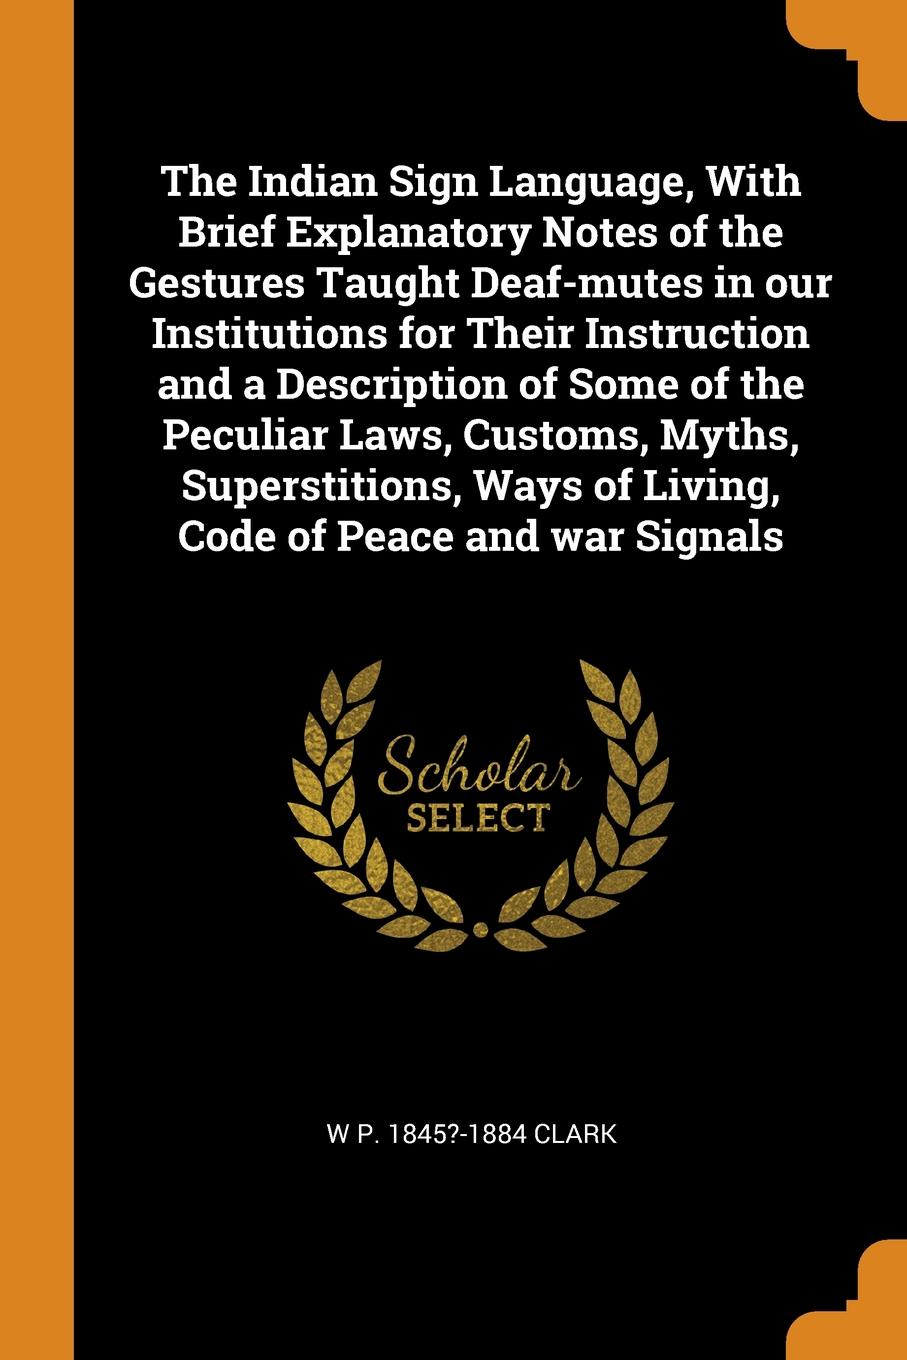 The Indian Sign Language, With Brief Explanatory Notes of the Gestures Taught Deaf-mutes in our Institutions for Their Instruction and a Description of Some of the Peculiar Laws, Customs, Myths, Superstitions, Ways of Living, Code of Peace and war...